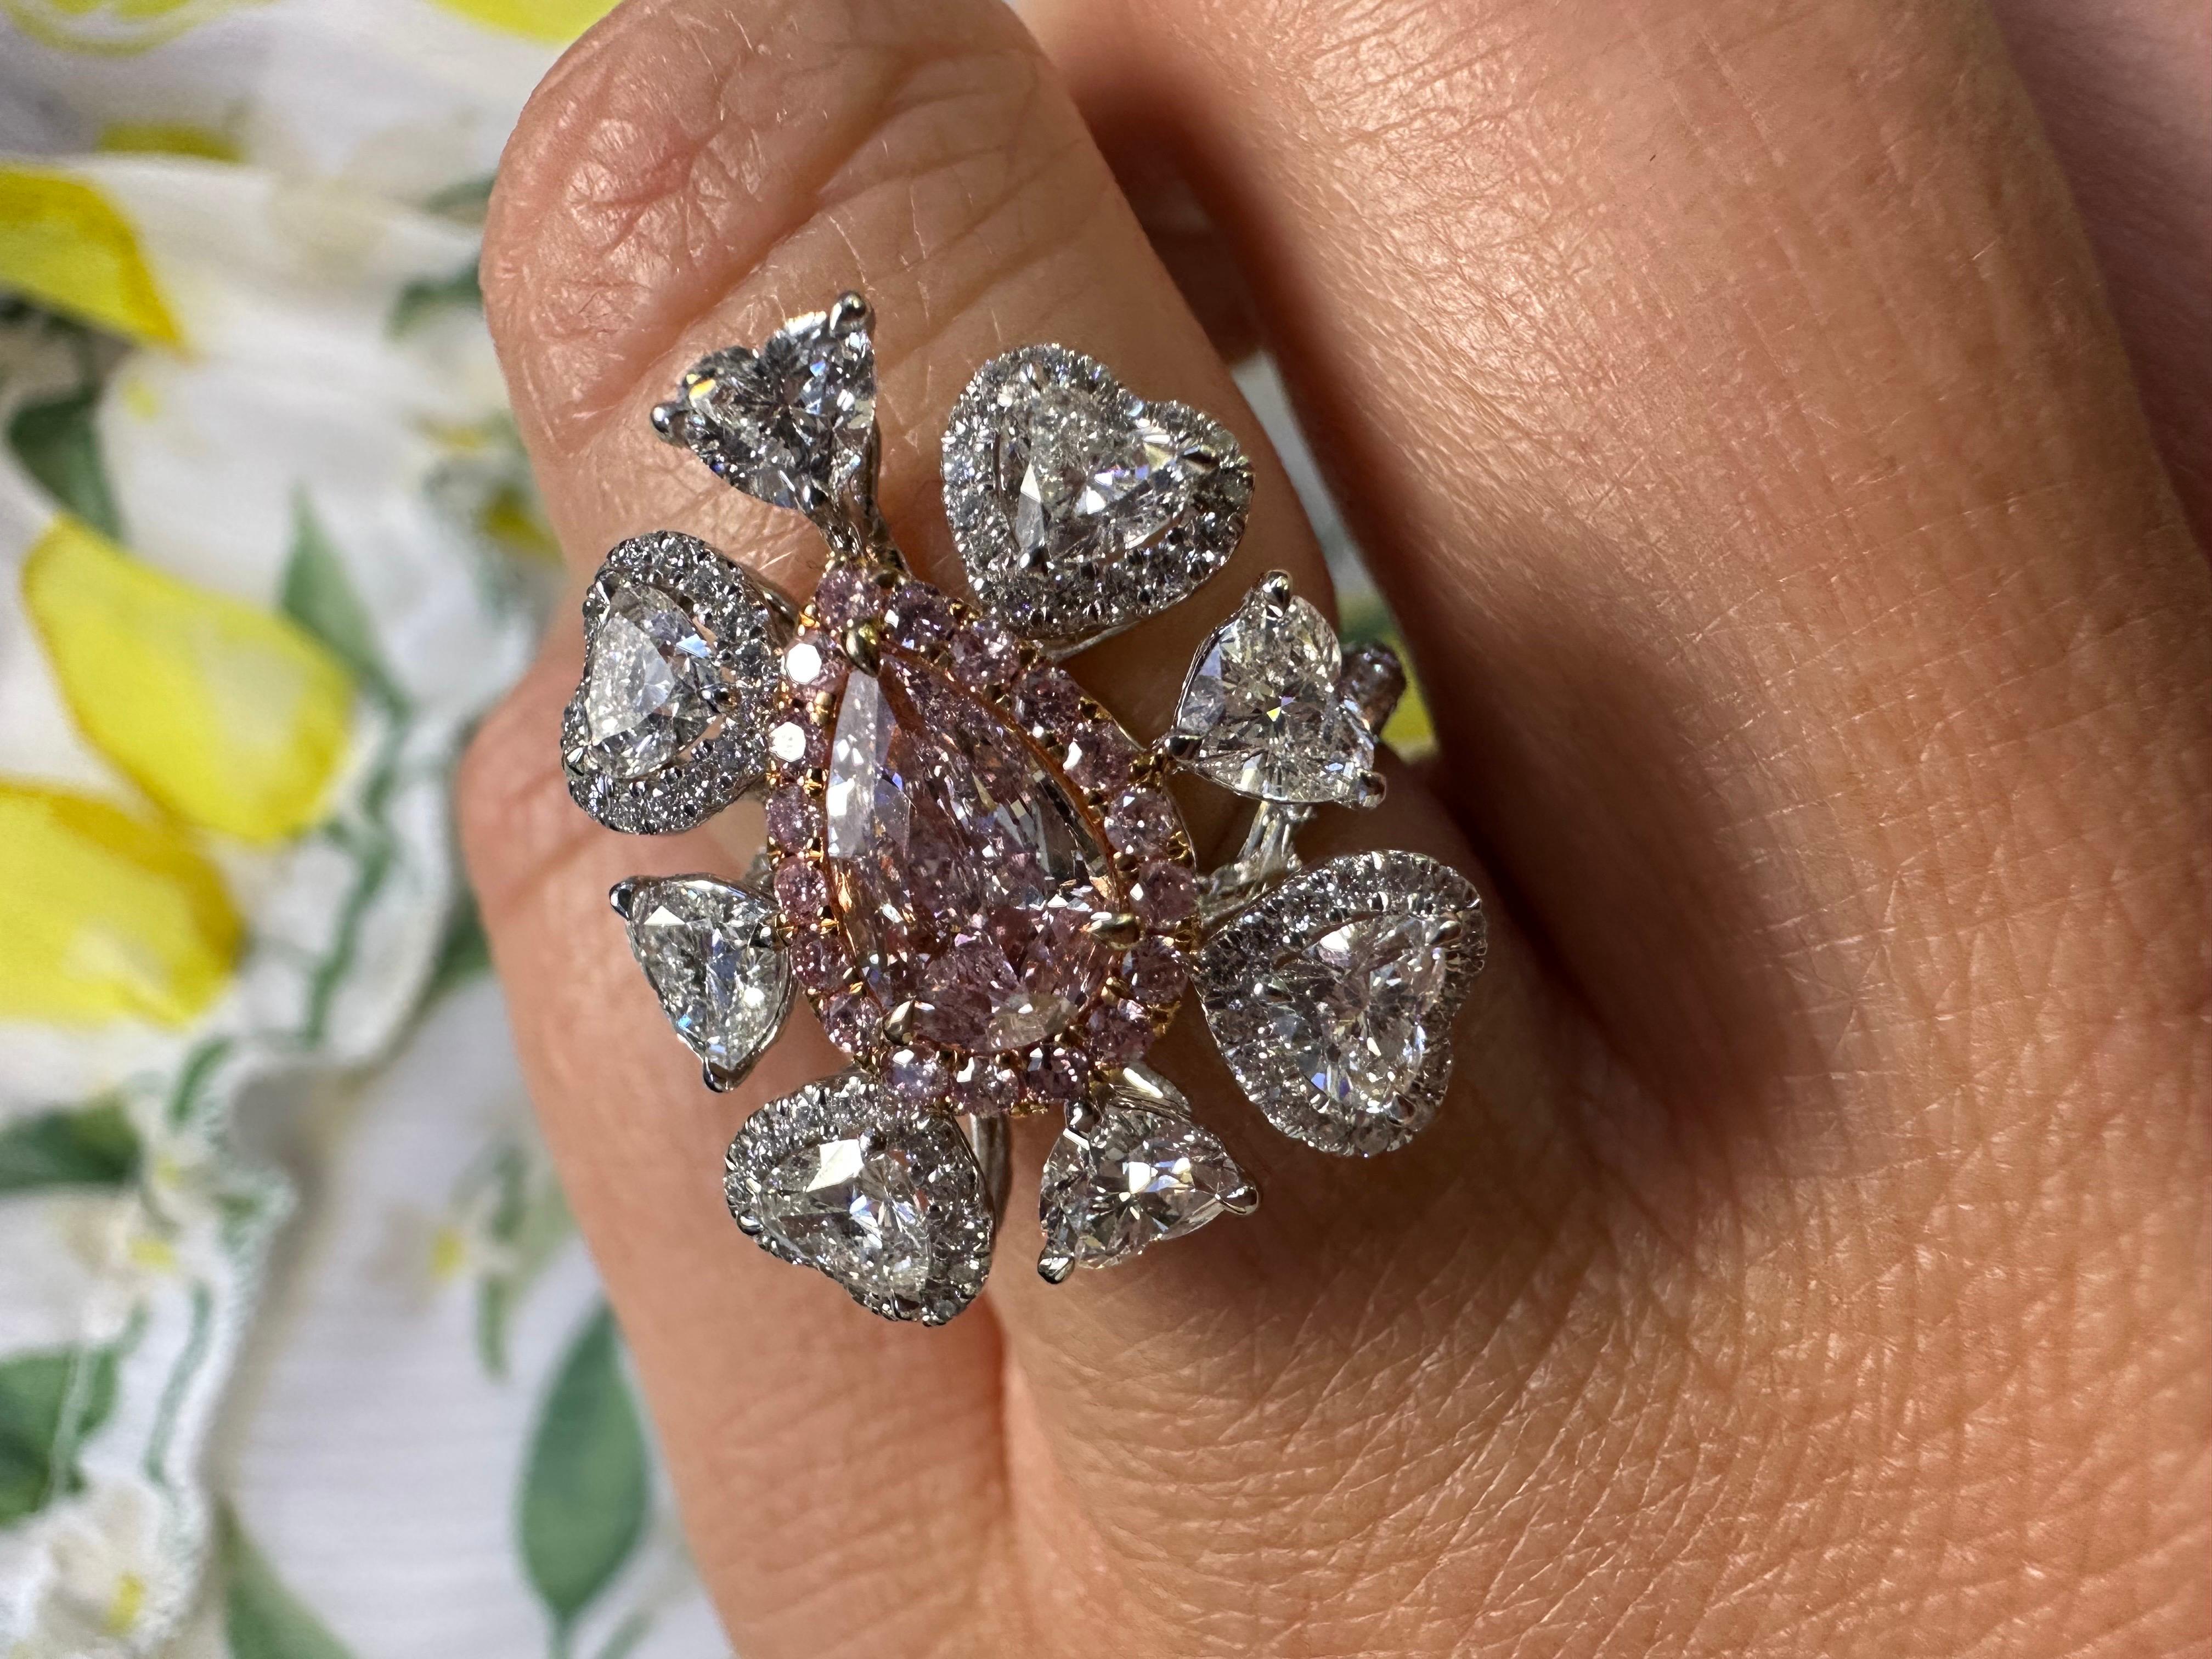 One of  a kind fancy pink diamond ring, a fun art deco style ring with pink and white diamonds in 18KT white gold, creator unknown but complexity of the ring speaks for itself, the designer definitly wanted a statement piece of jewelry and